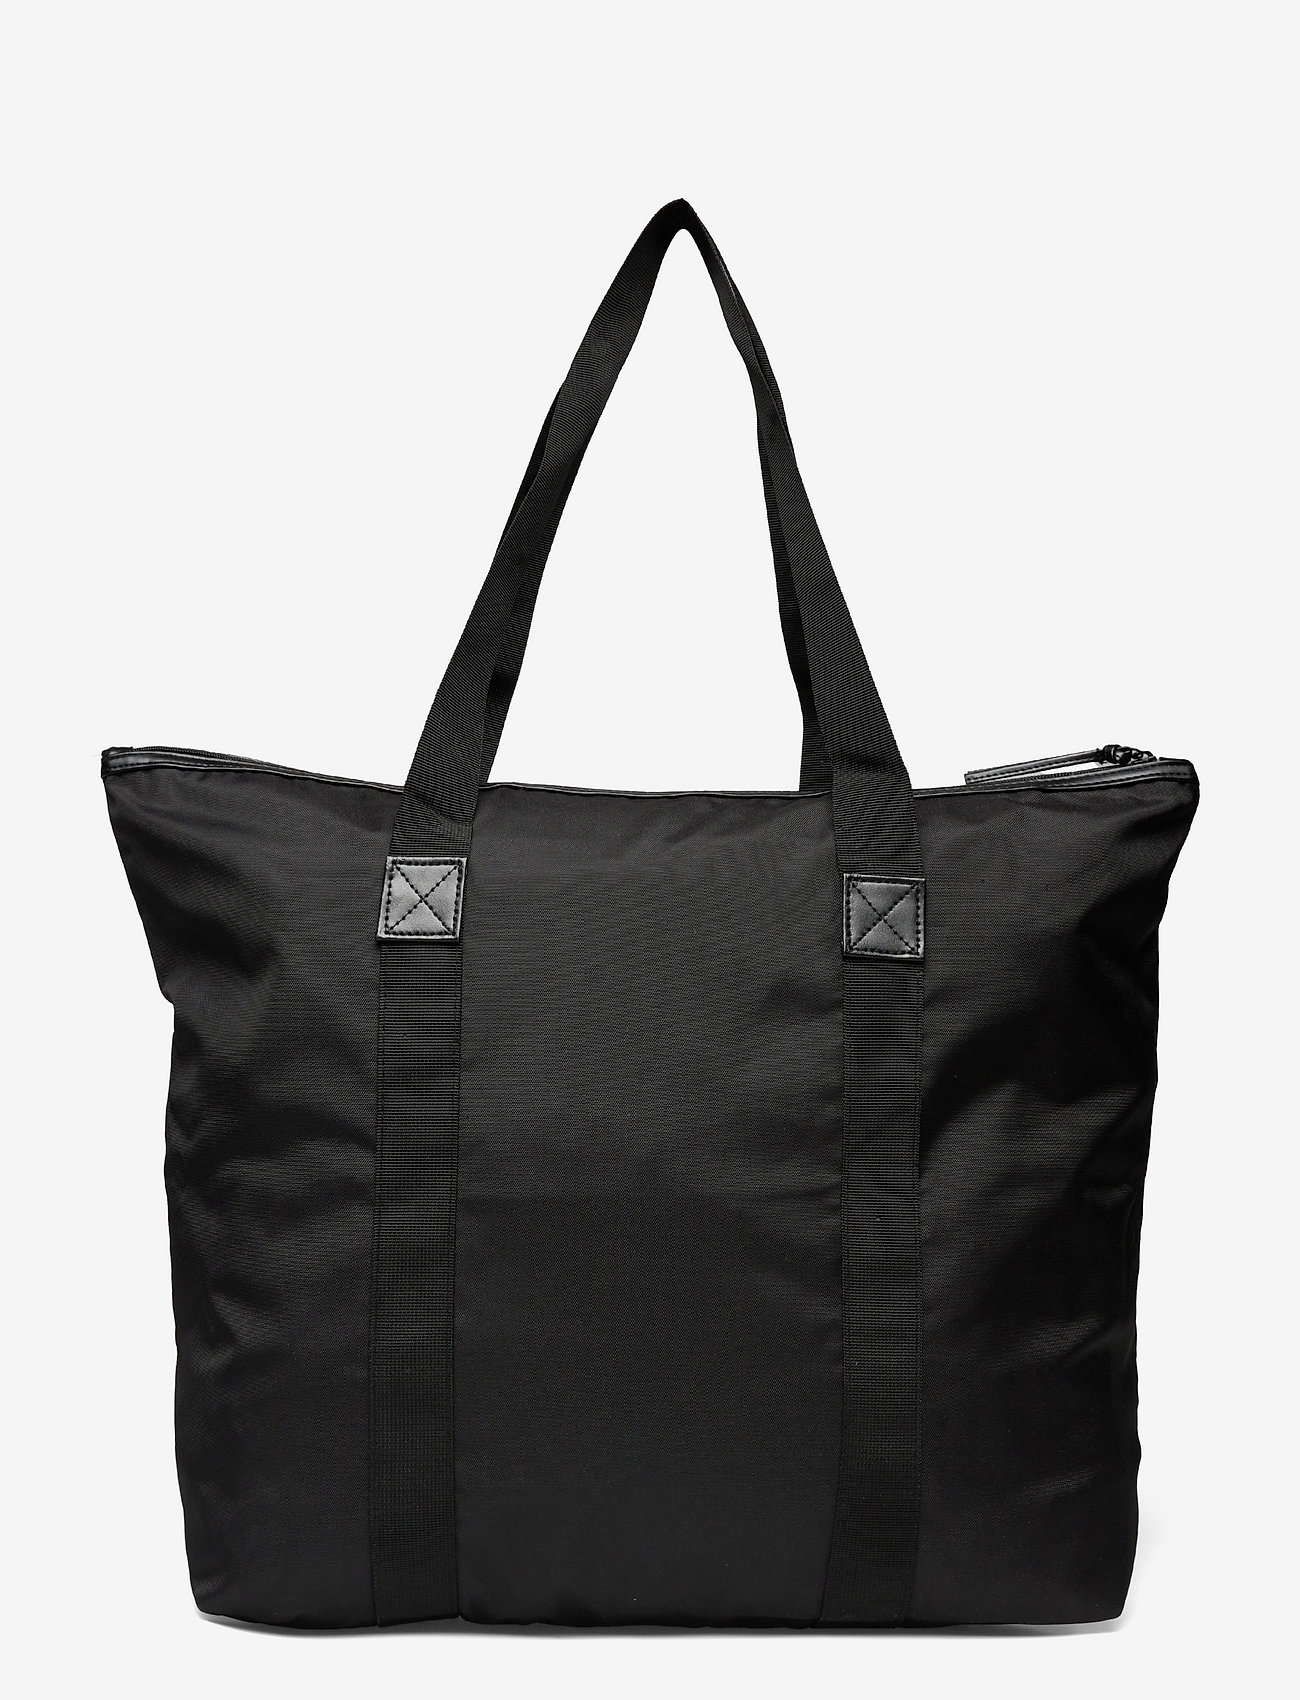 DAY ET - Day Gweneth RE-S Bag - totes - black - 1